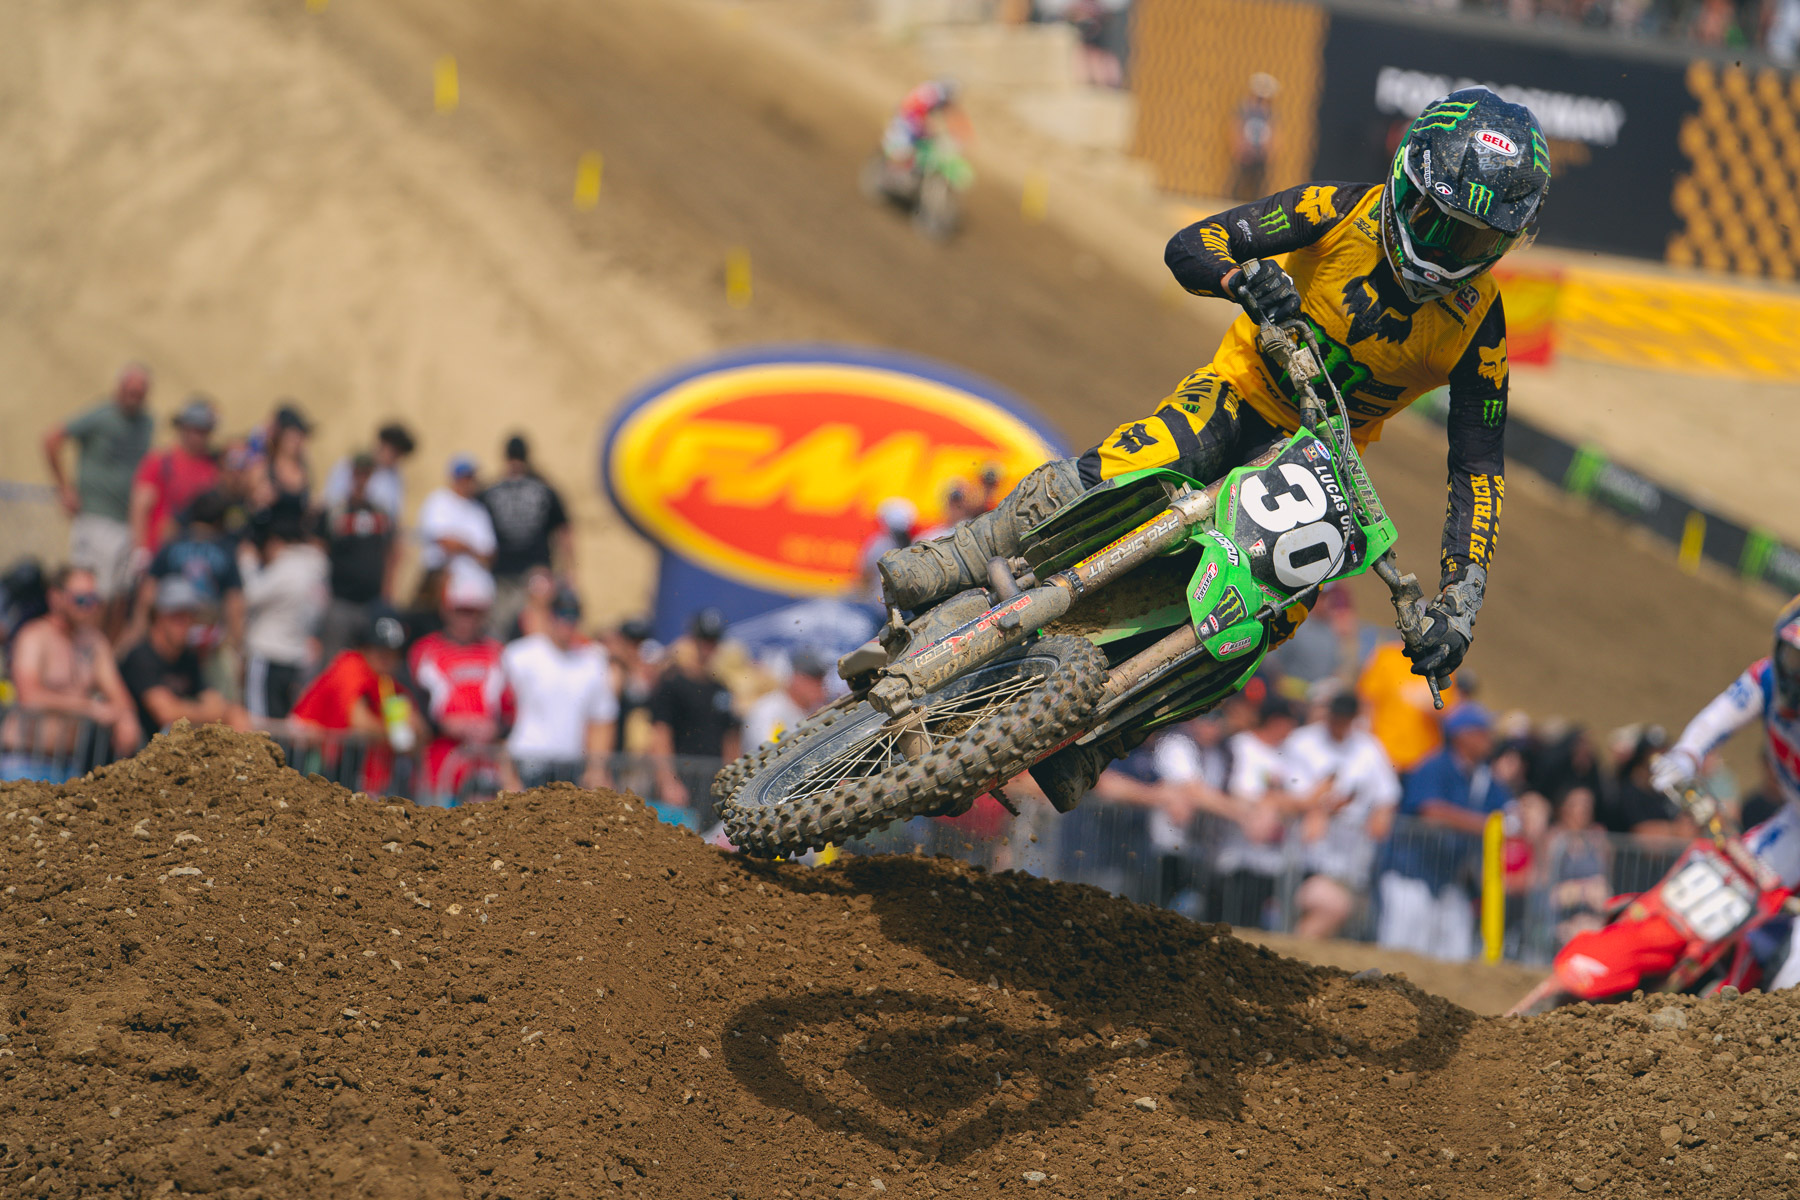 2022 Hangtown Motocross Entry List, Injury Report and Track Map